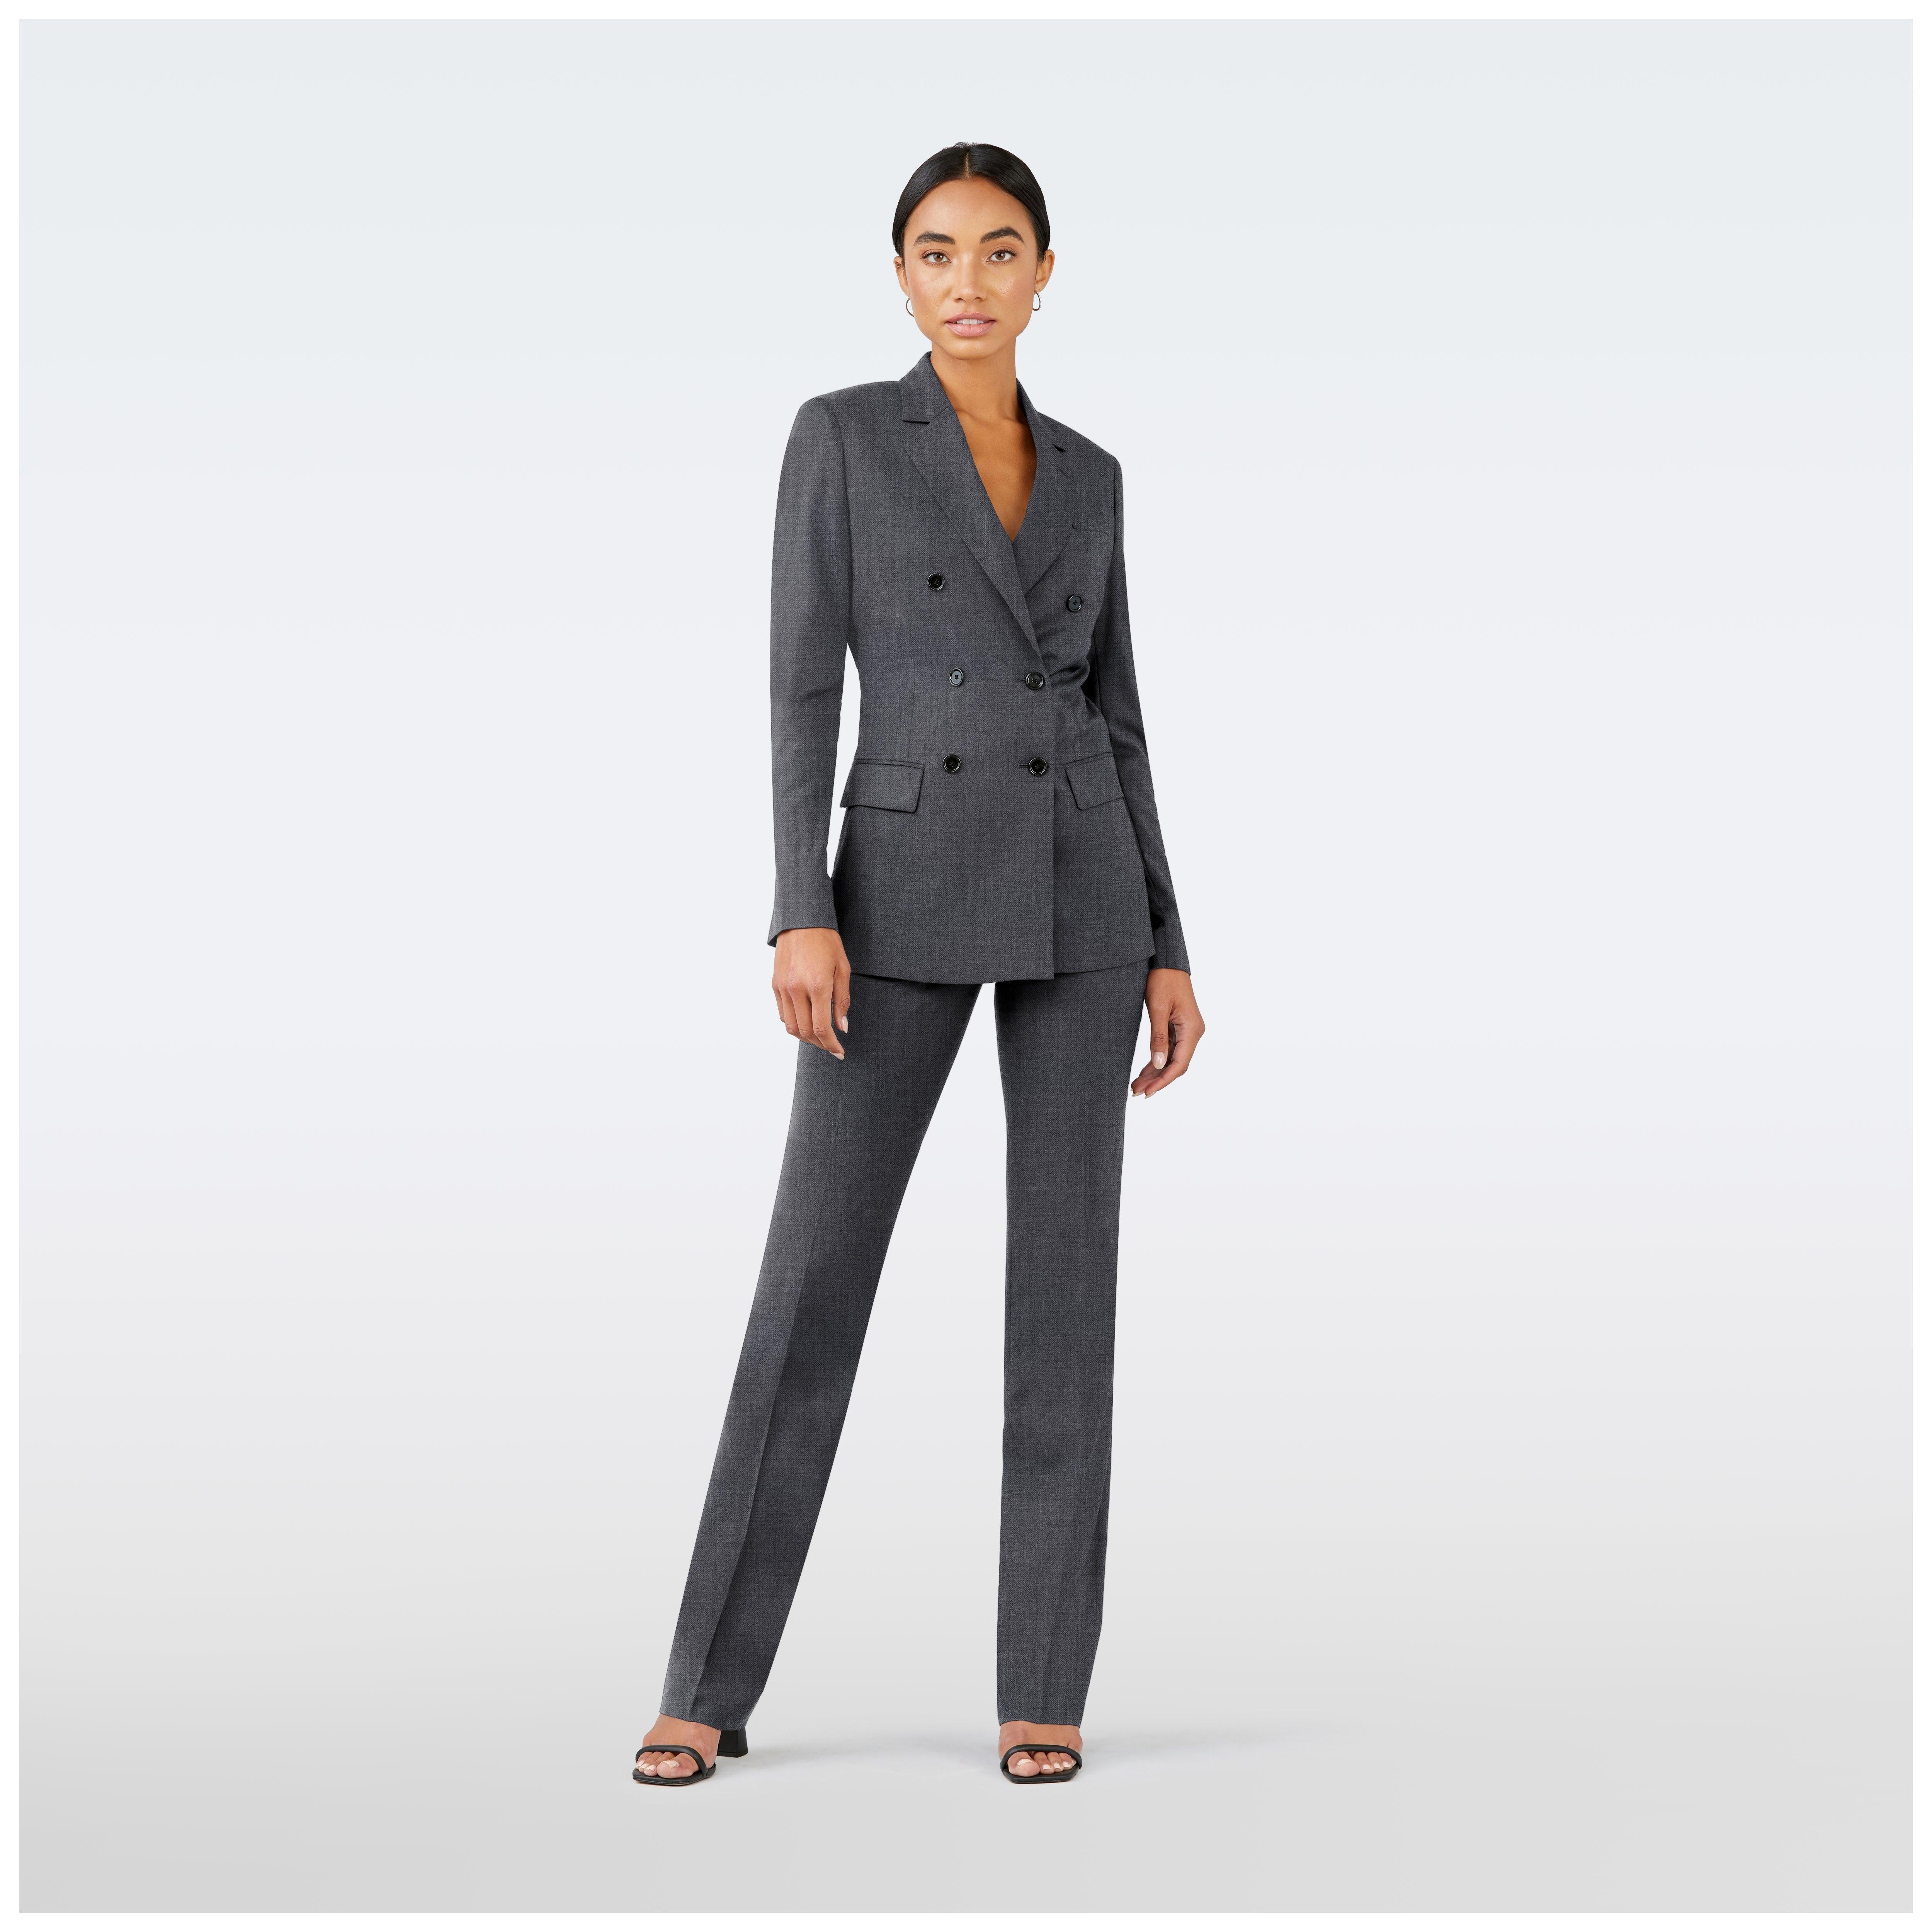 Custom Suits Made For You - Hemsworth Gray Suit Women | INDOCHINO